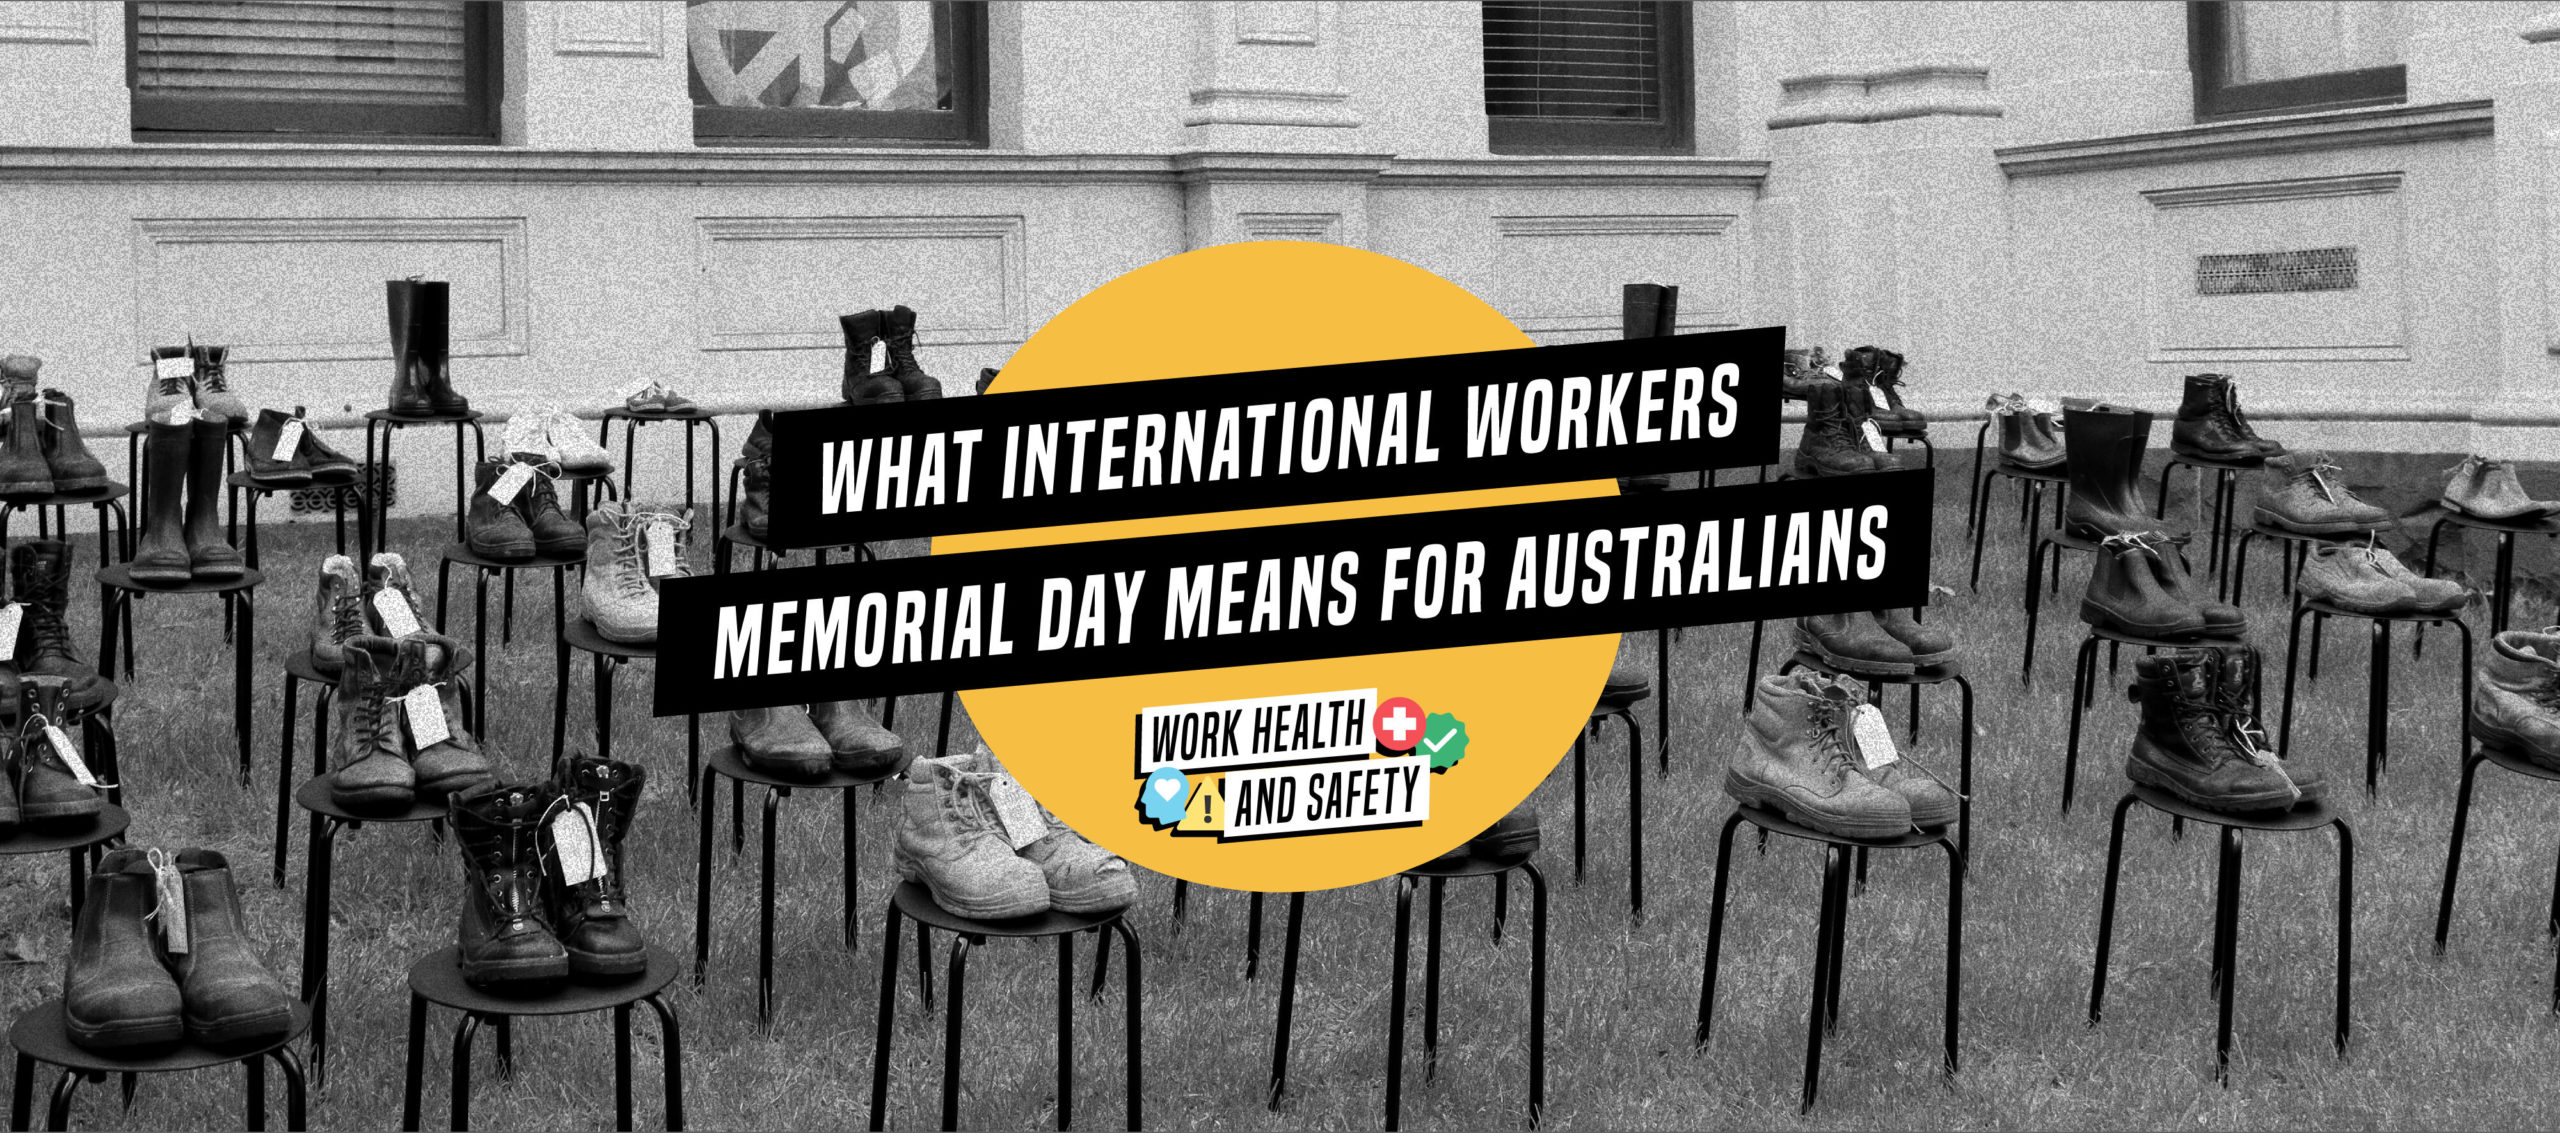 What International Workers Memorial Day means for Australians